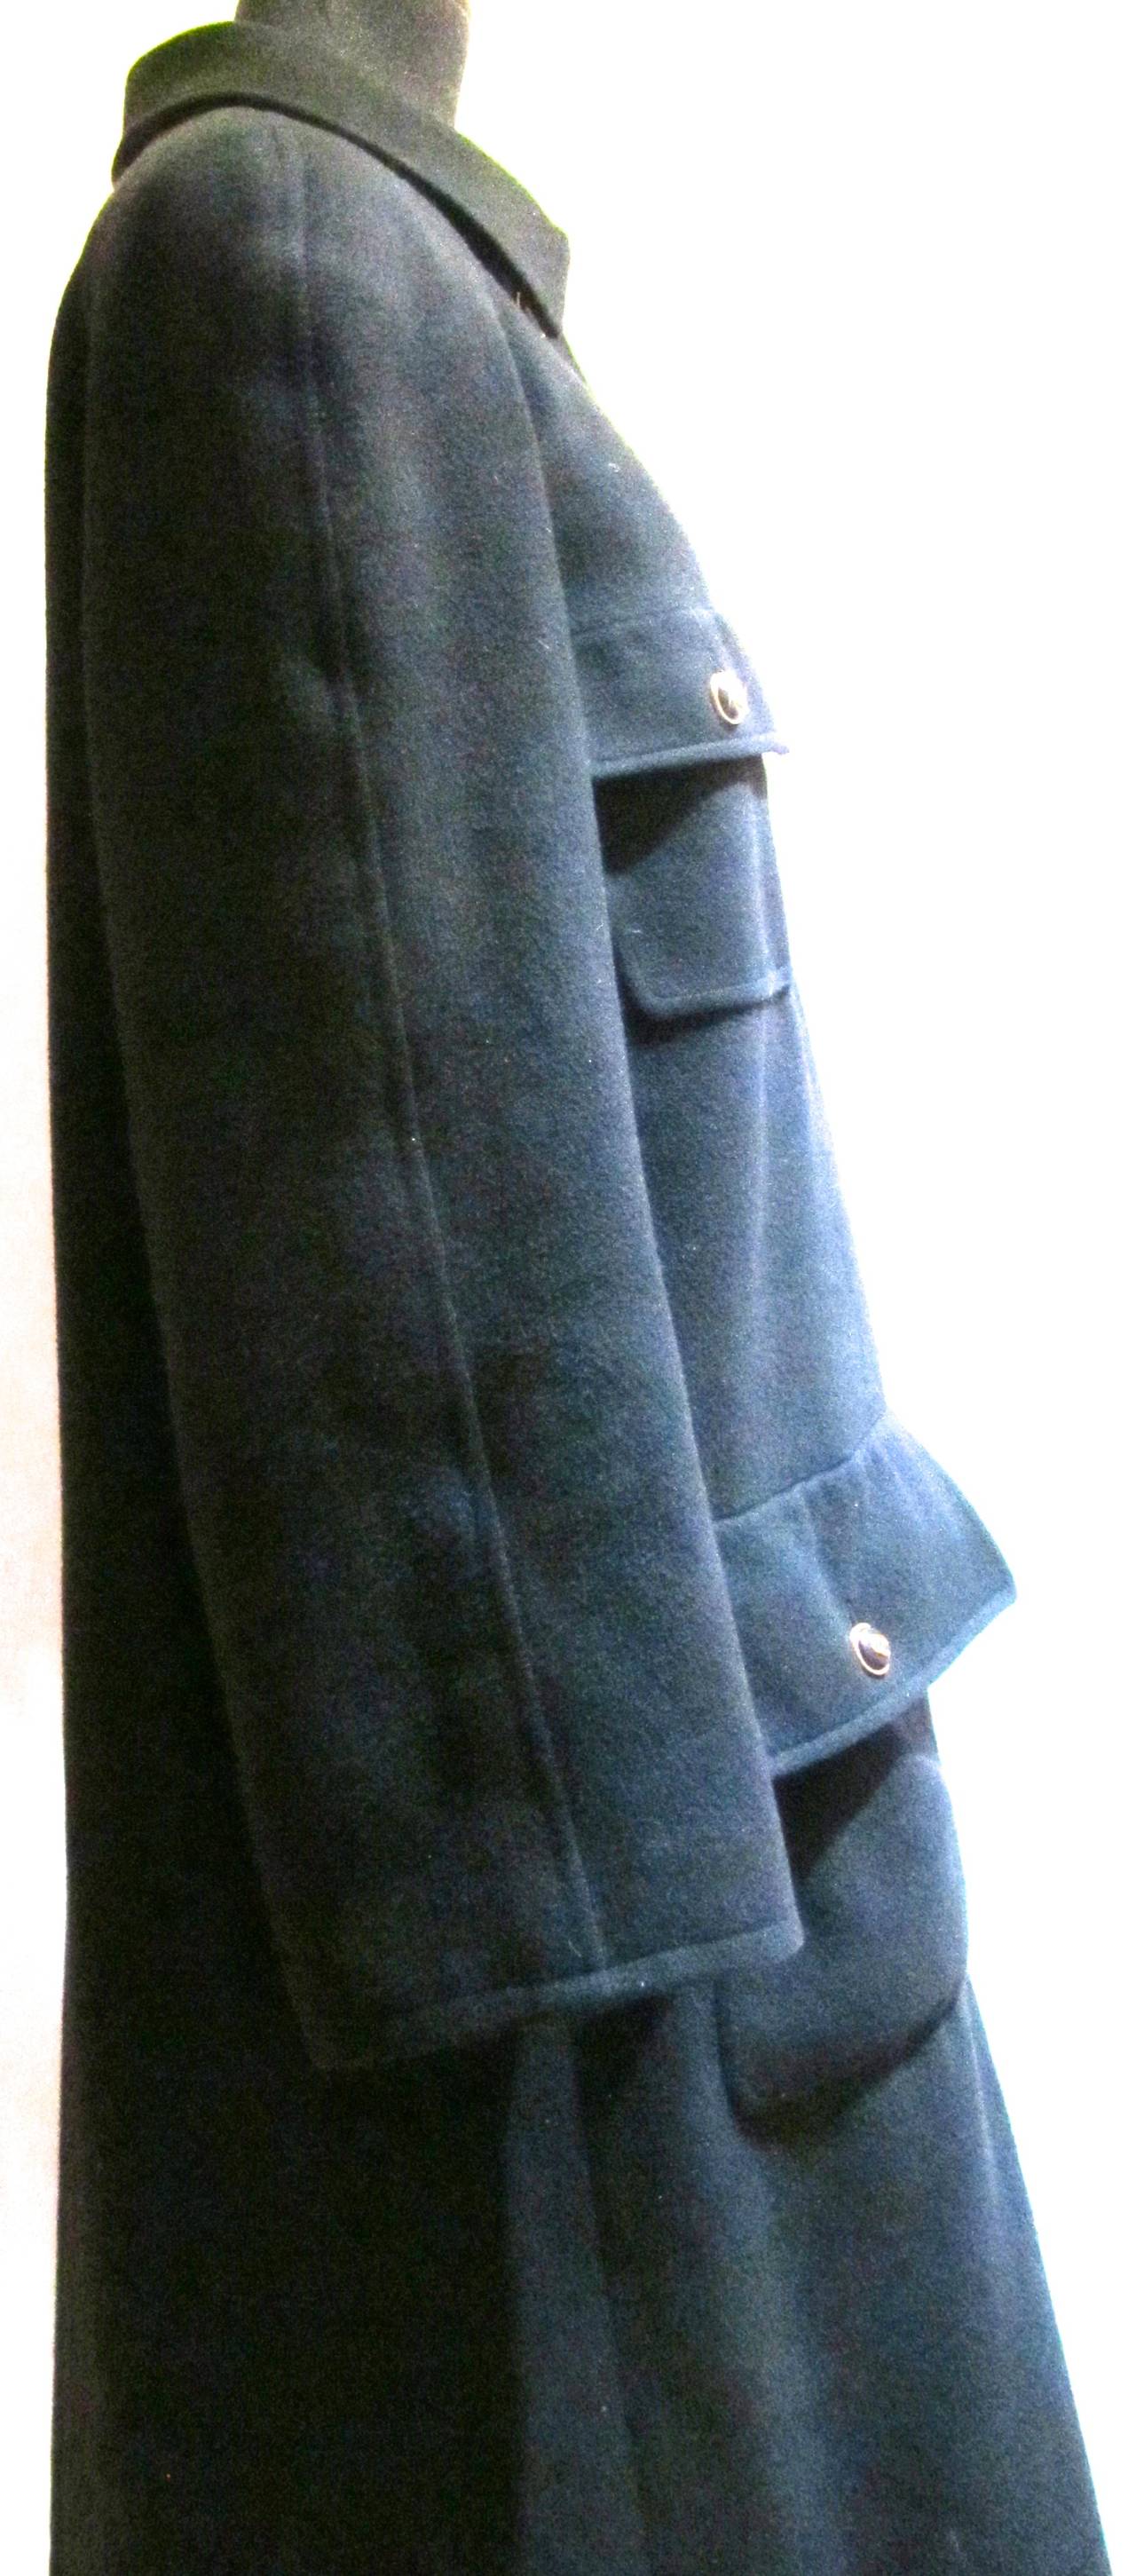 Black Cashmere Chanel Coat with Logo Buttons In Excellent Condition For Sale In Boca Raton, FL